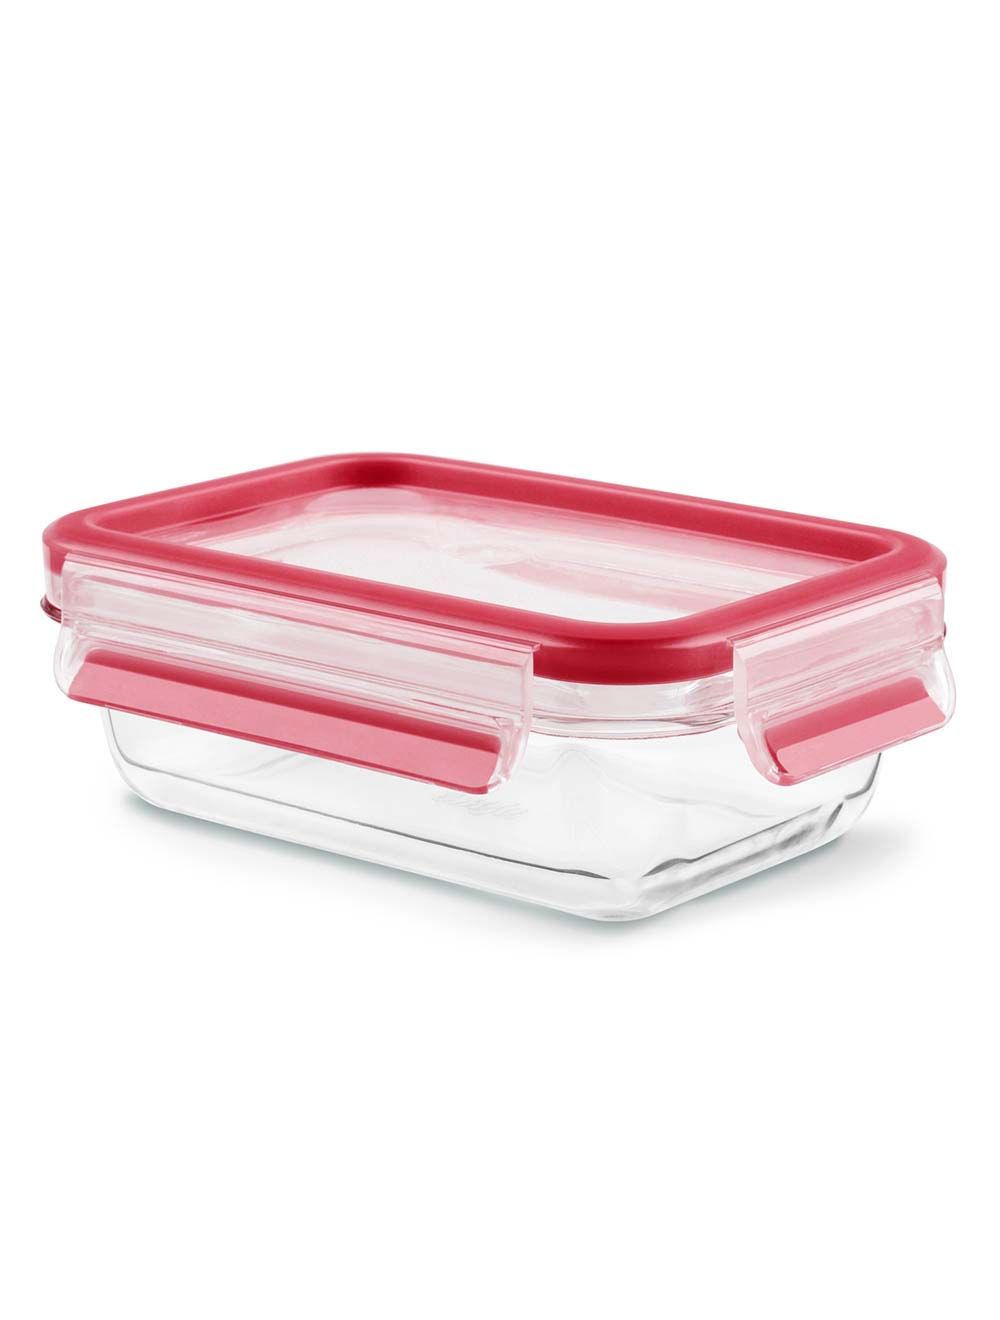 Tefal Masterseal Fresh Box 0.5 L Food Storage Container, K3010212